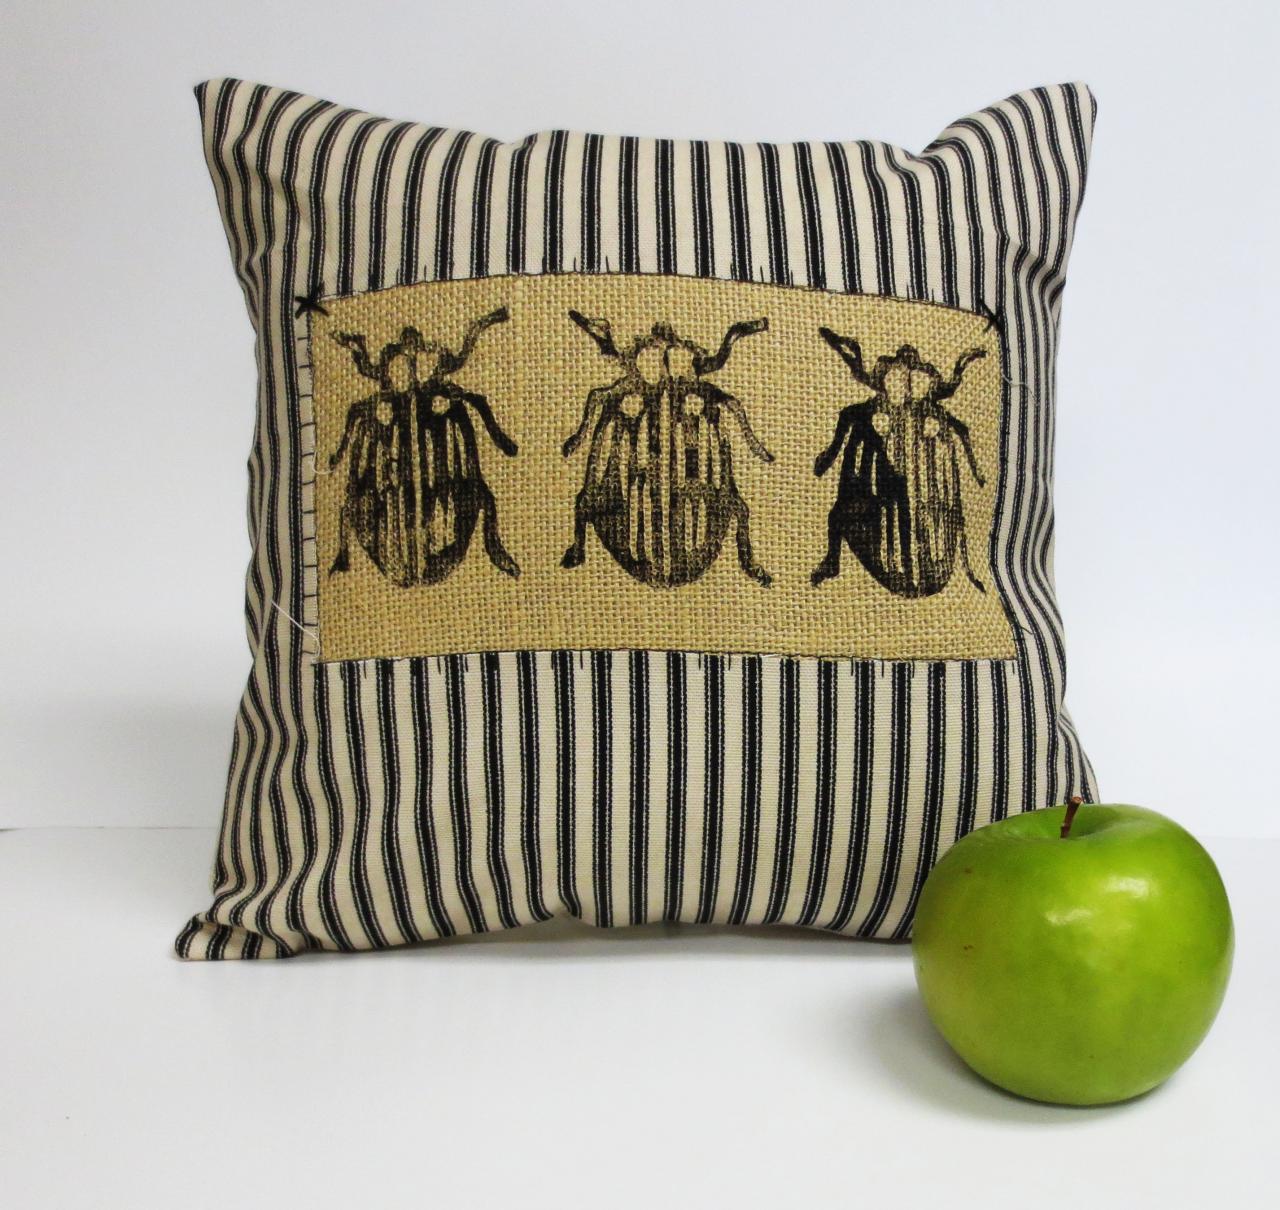 Decorative Pillow Cover With Beetle Hand Block Print Design